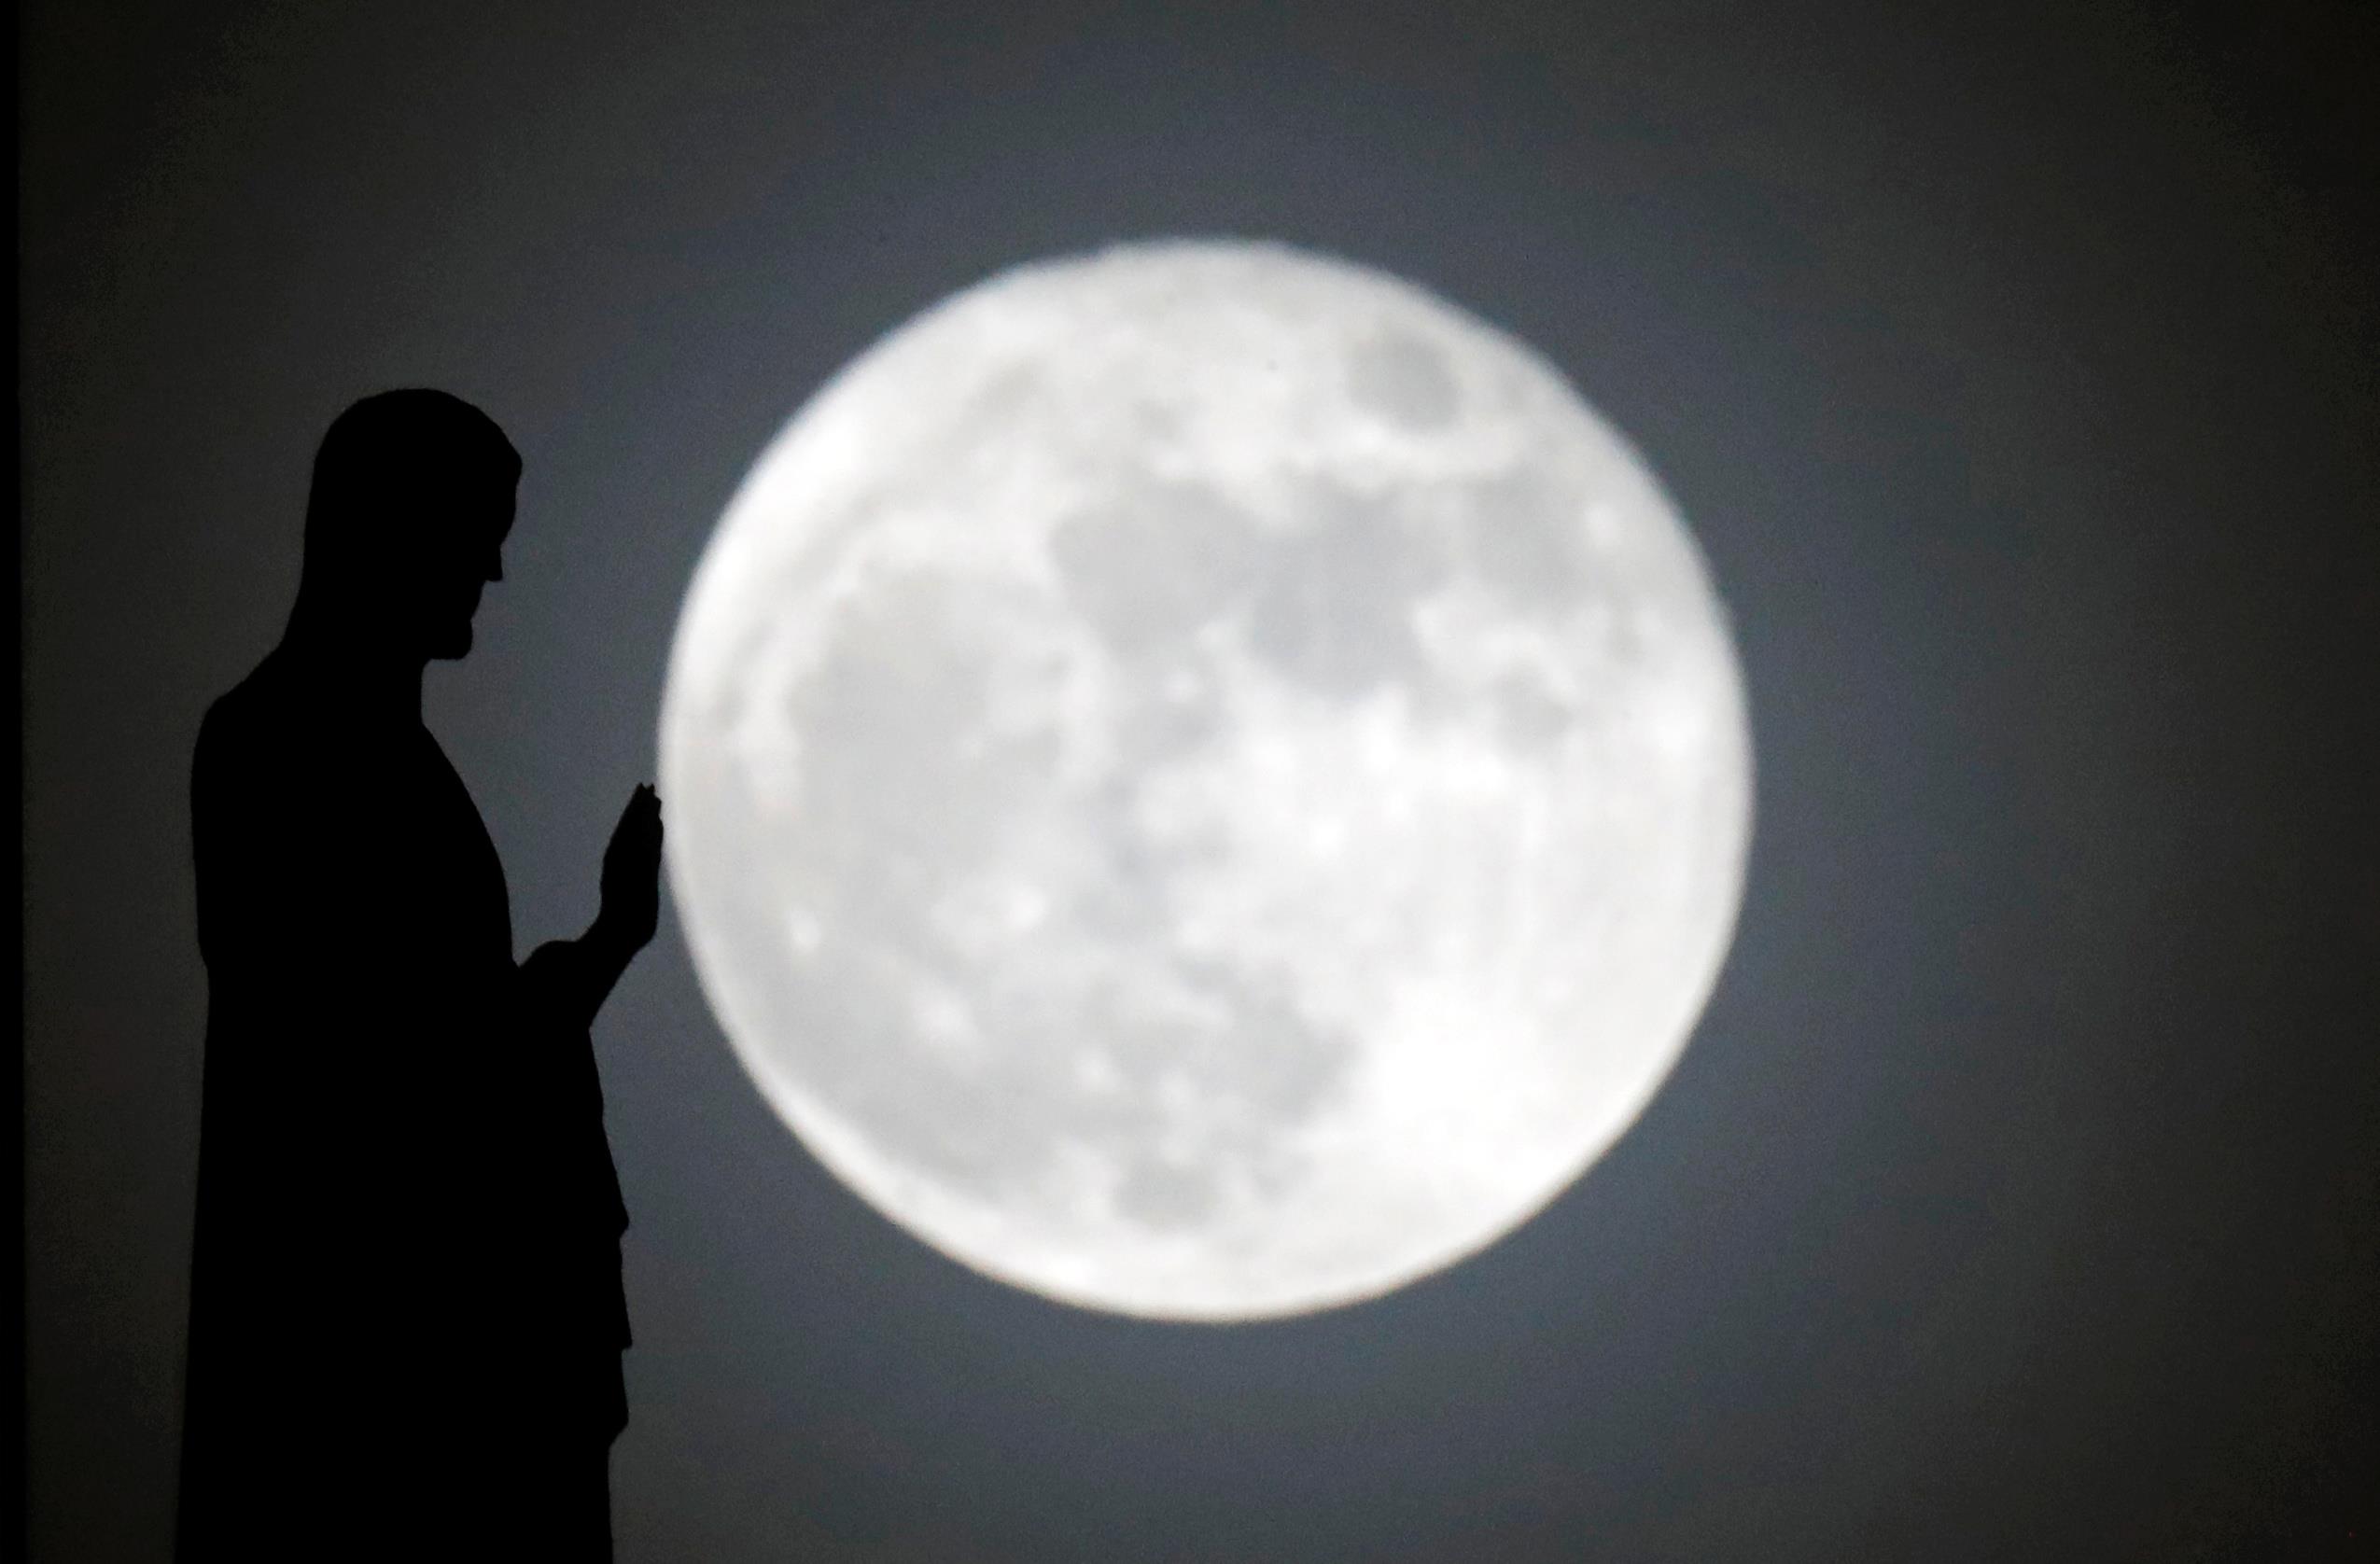 A statue on the roof of Notre-Dame cathedral is silhouetted in front of a supermoon in Paris